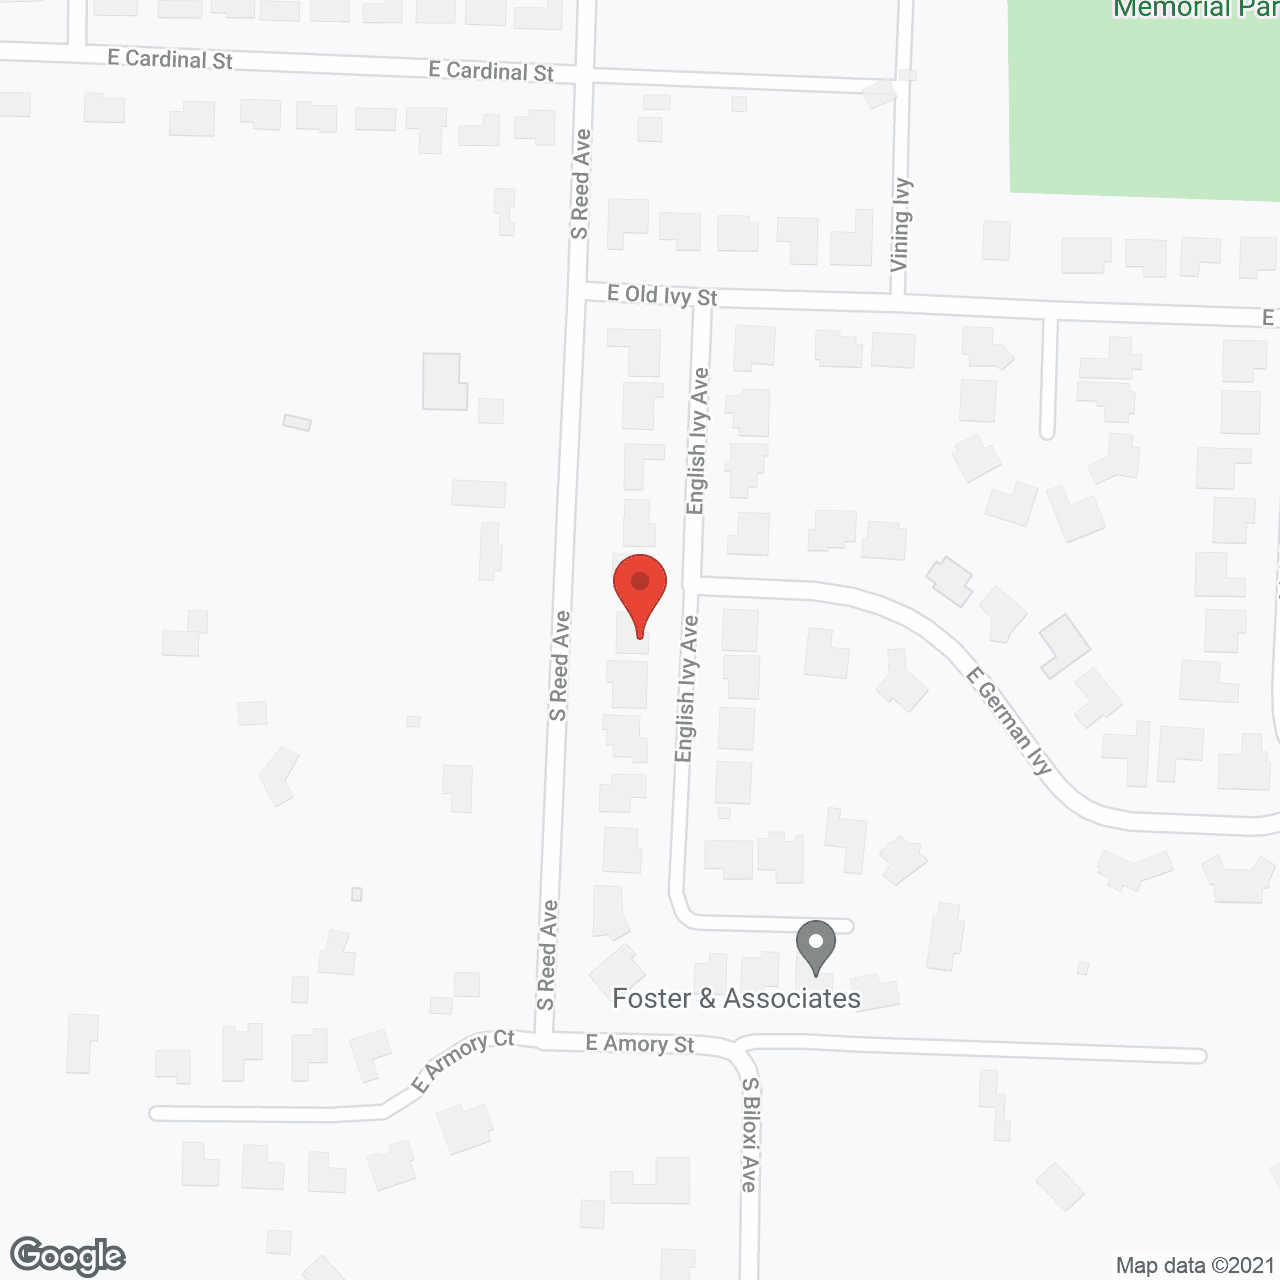 Heart To Heart Senior Care in google map